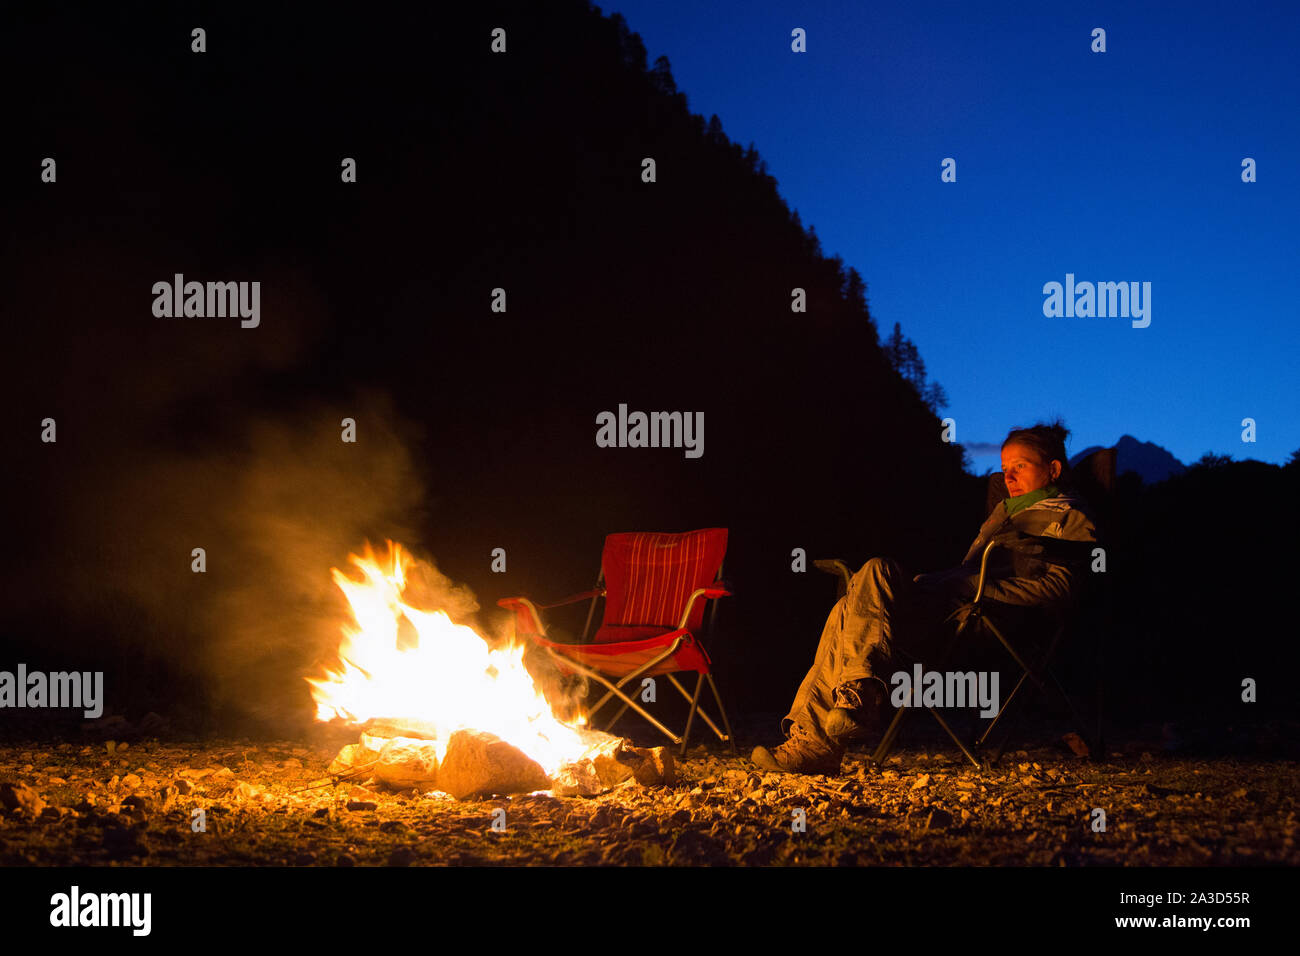 Sitting at a glowing camp fire in wilderness at night, freedom camping in beautiful nature, Valbona Valley, Albania Stock Photo